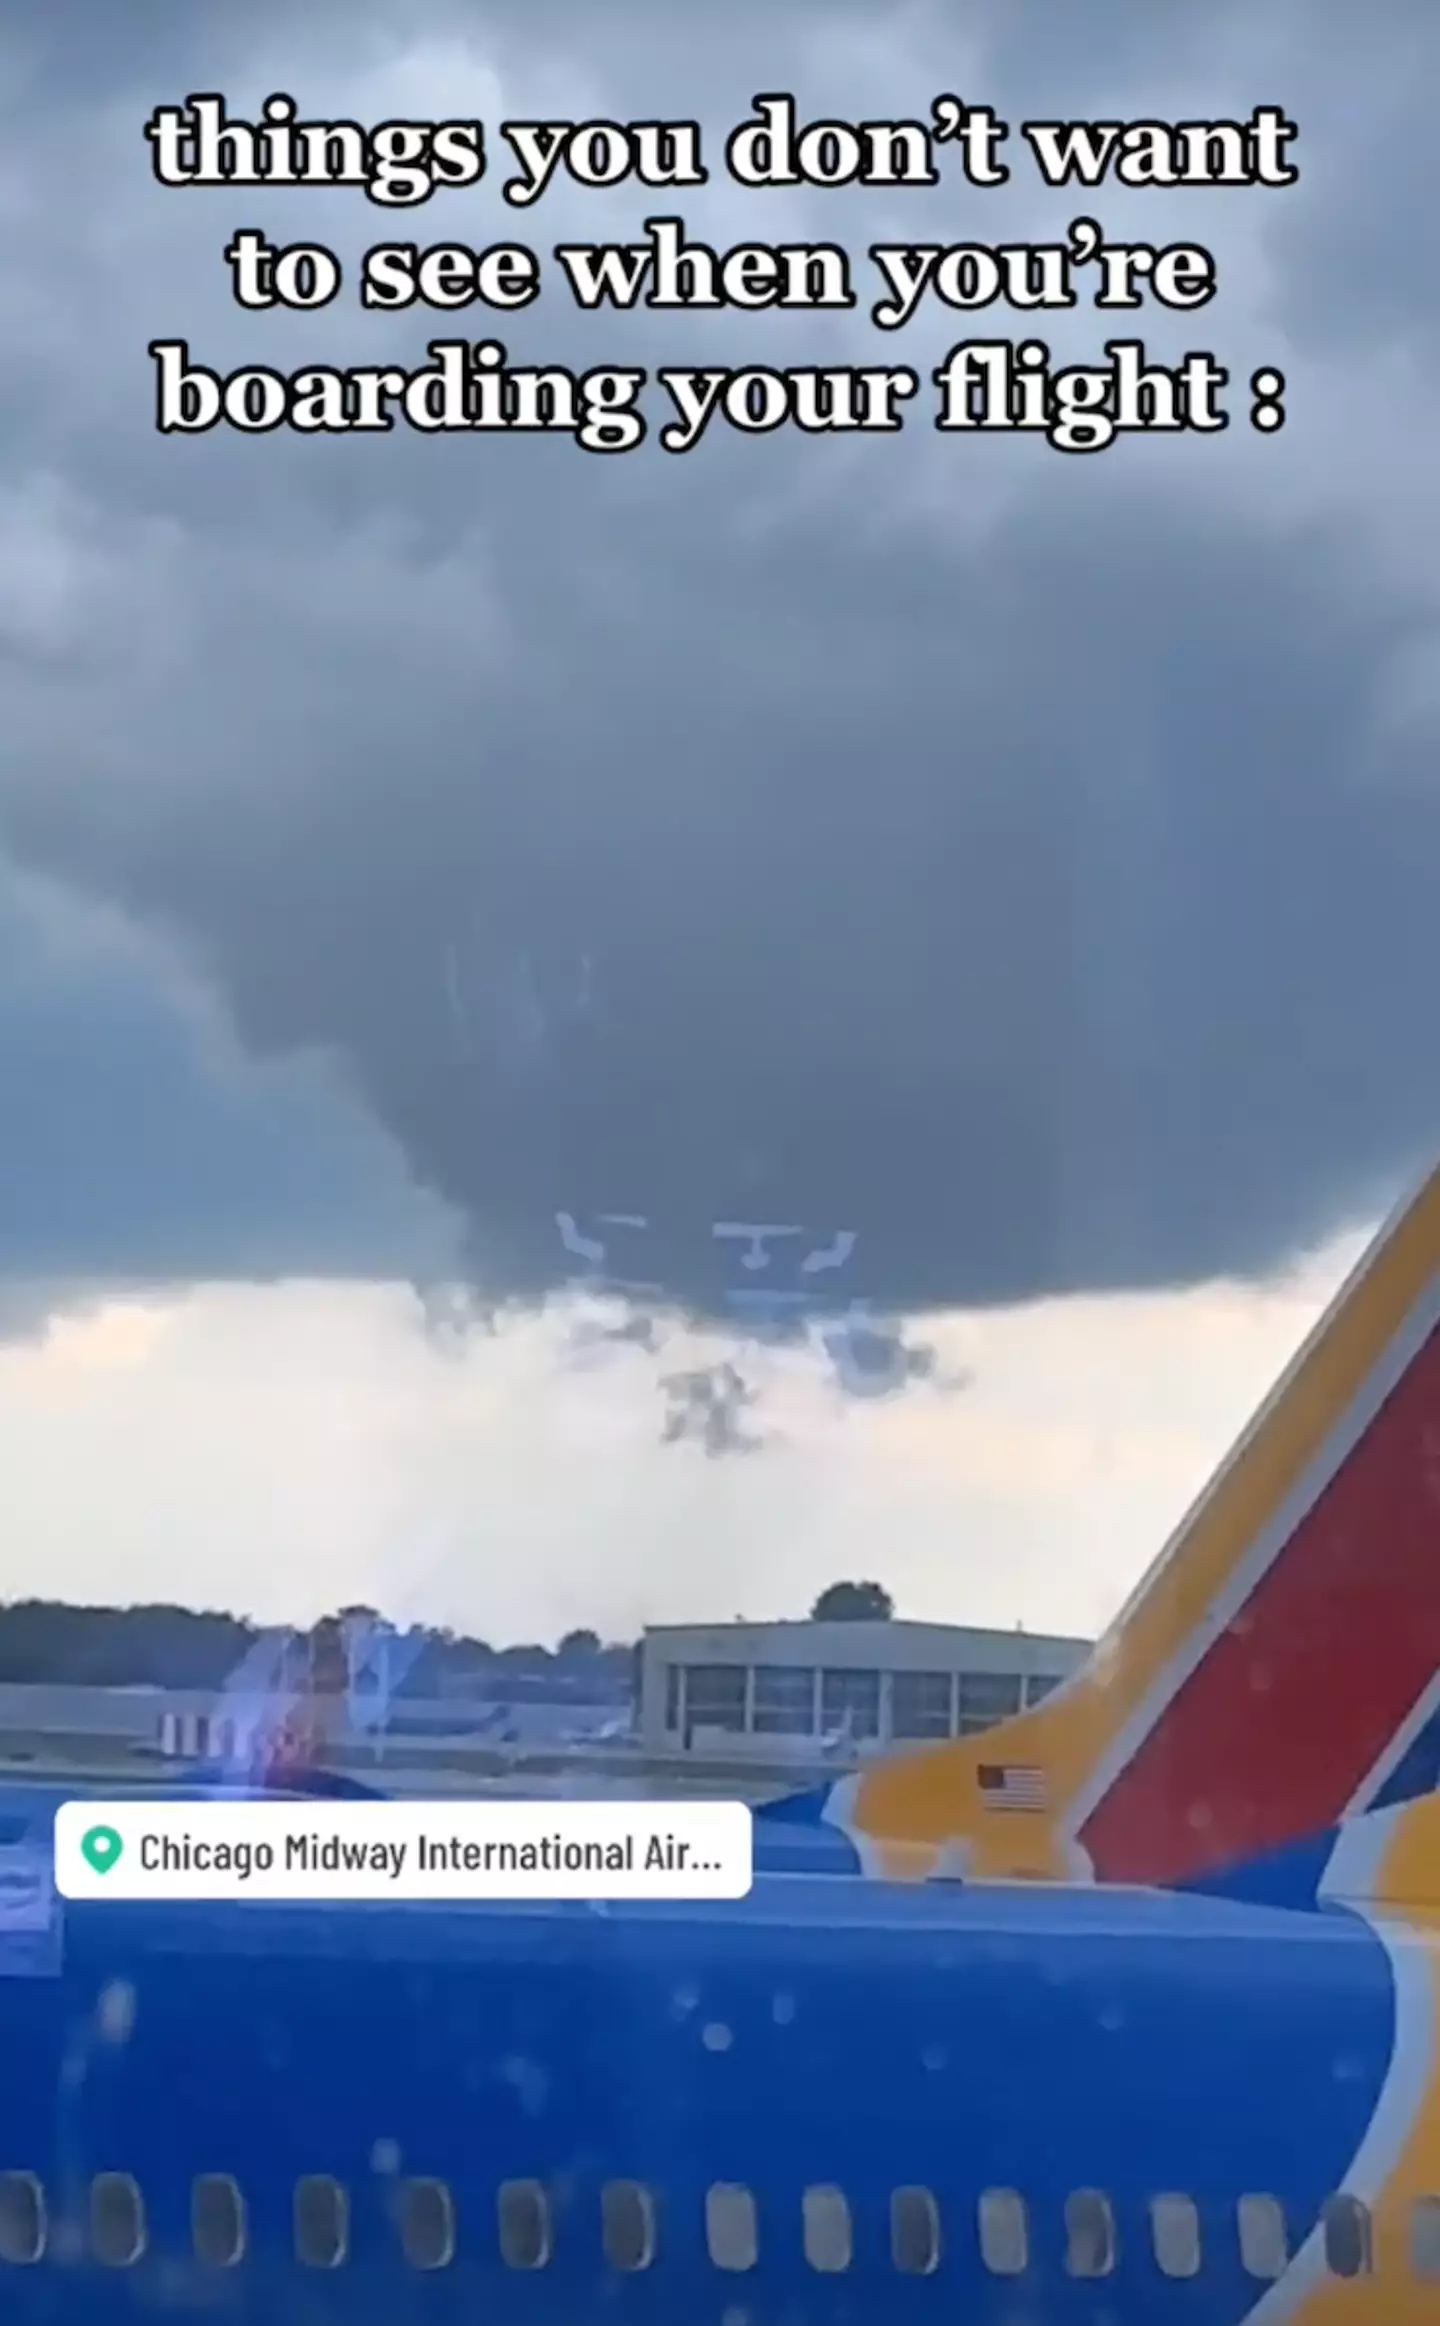 Taylor Mobley filmed the scary weather outside the airport.